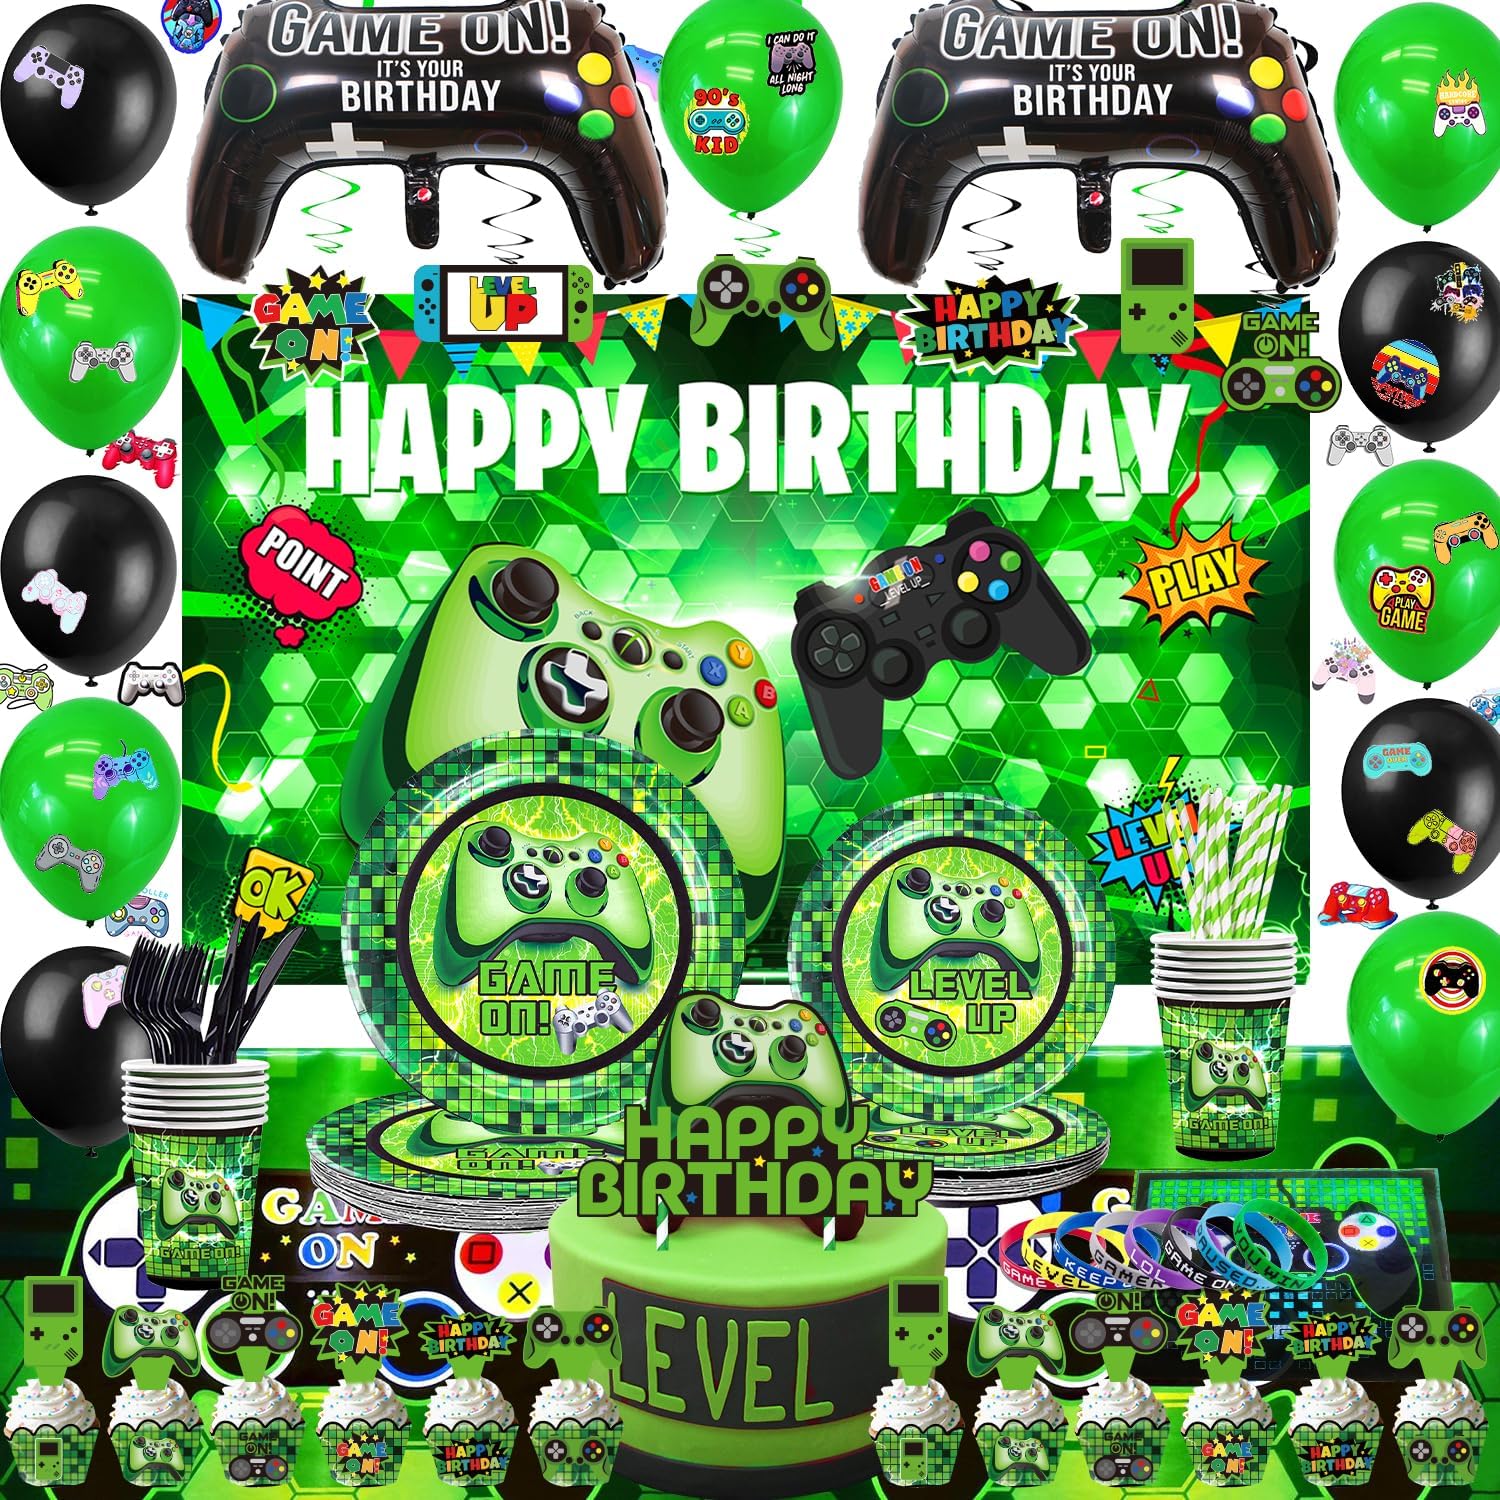 Green Gamer Birthday Party Decoration – 217Pcs Video Game Gaming Party Supplies For Boys Birthday Party – Backdrop, Table Cover, Plates, Cups, Napkins, Utensils, Hanging Swirls, Cupcake Topper, Cake